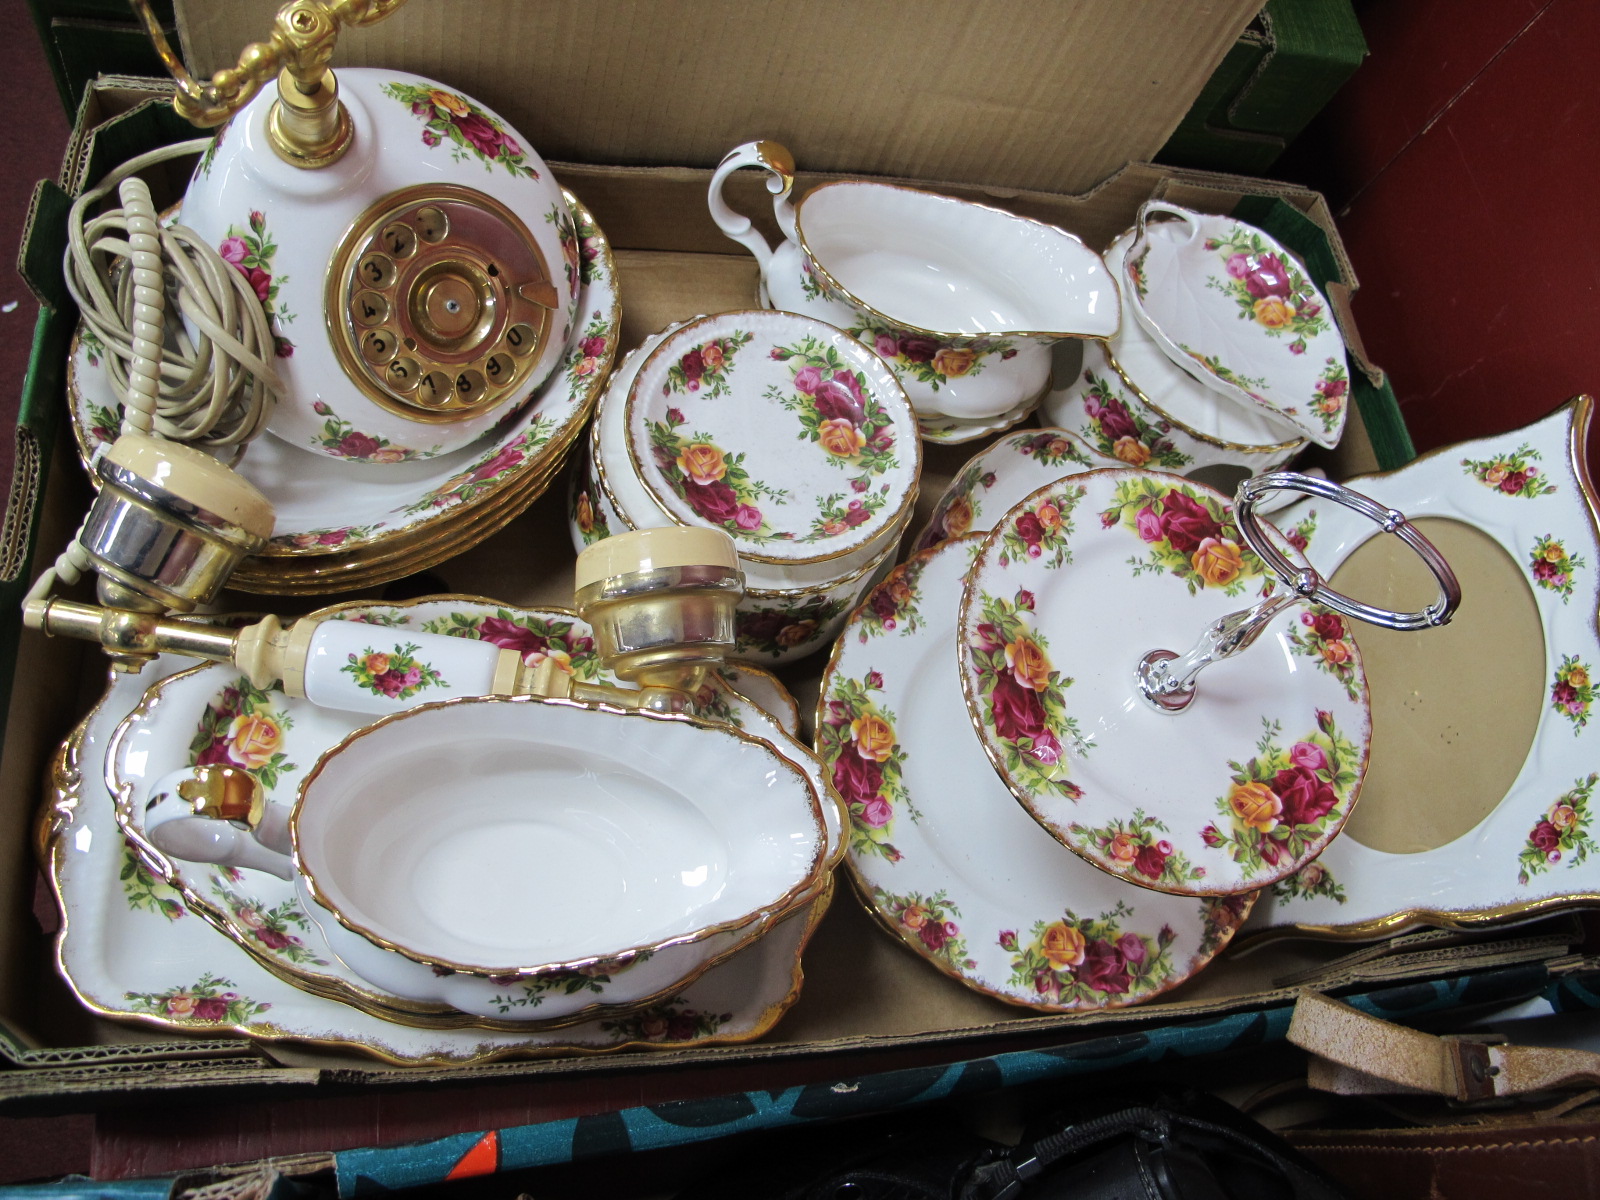 Royal Albert 'Old Country Roses' Telephone, cake stand, photo frame, posy and table ware.